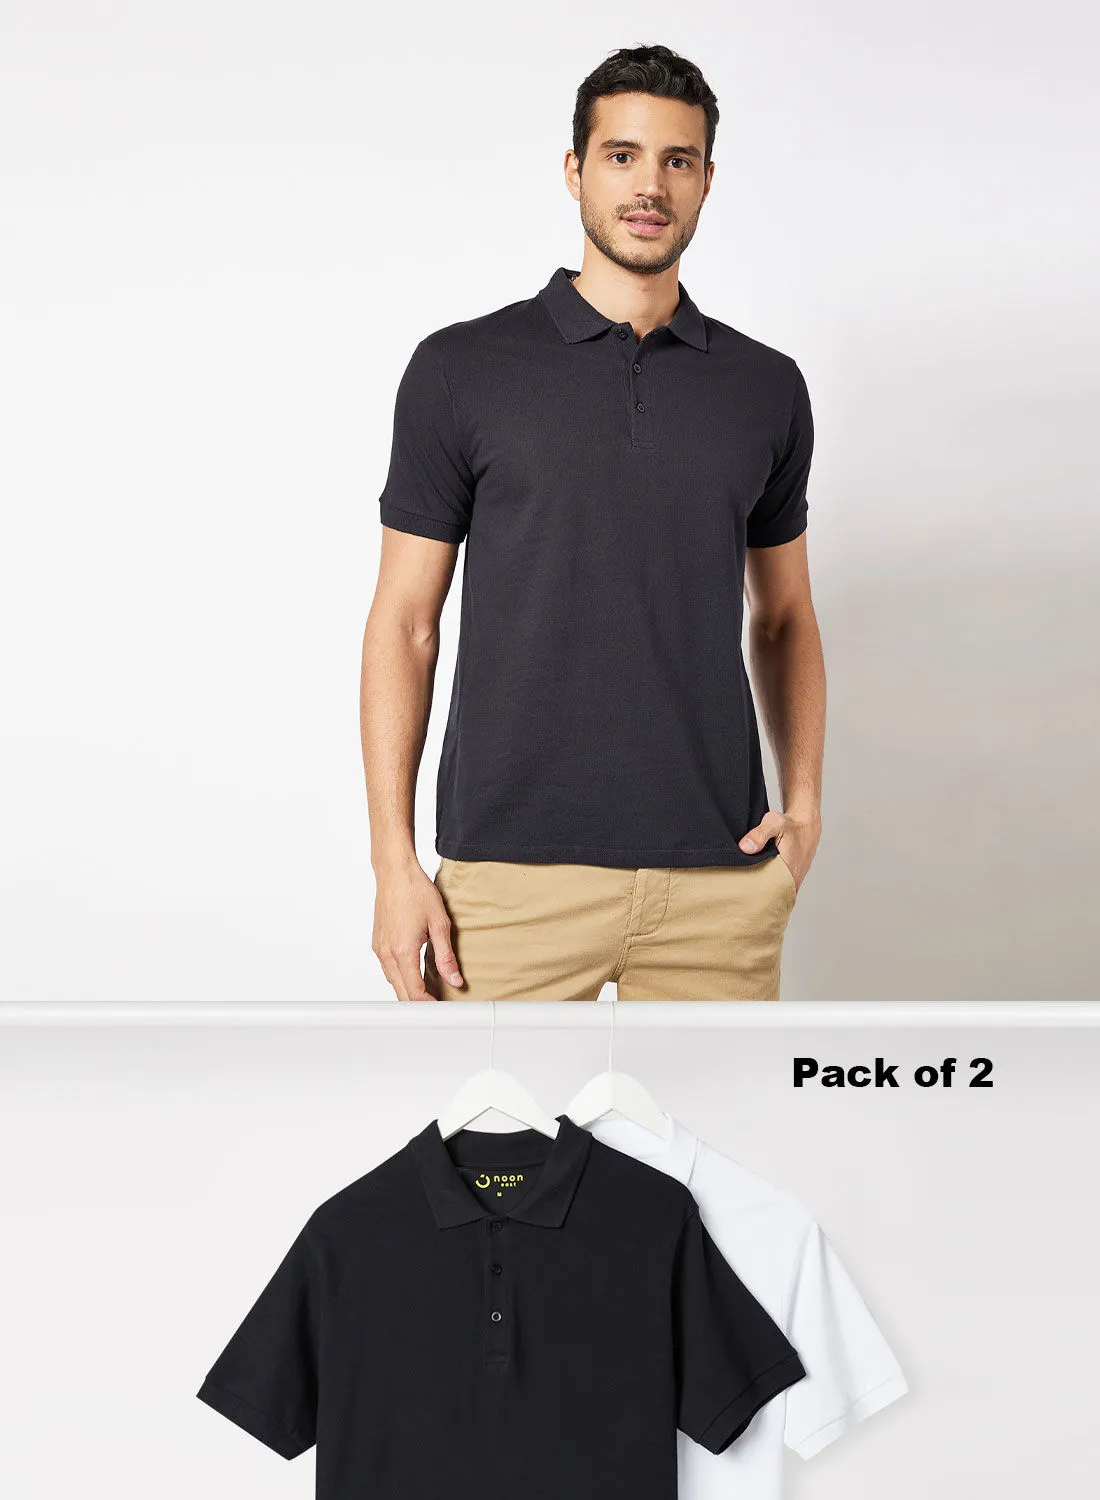 Noon East Pack Of 2 Men's Basic Casual Polo Neck Cotton Regular Fit Half Sleeve T-Shirt White/Black